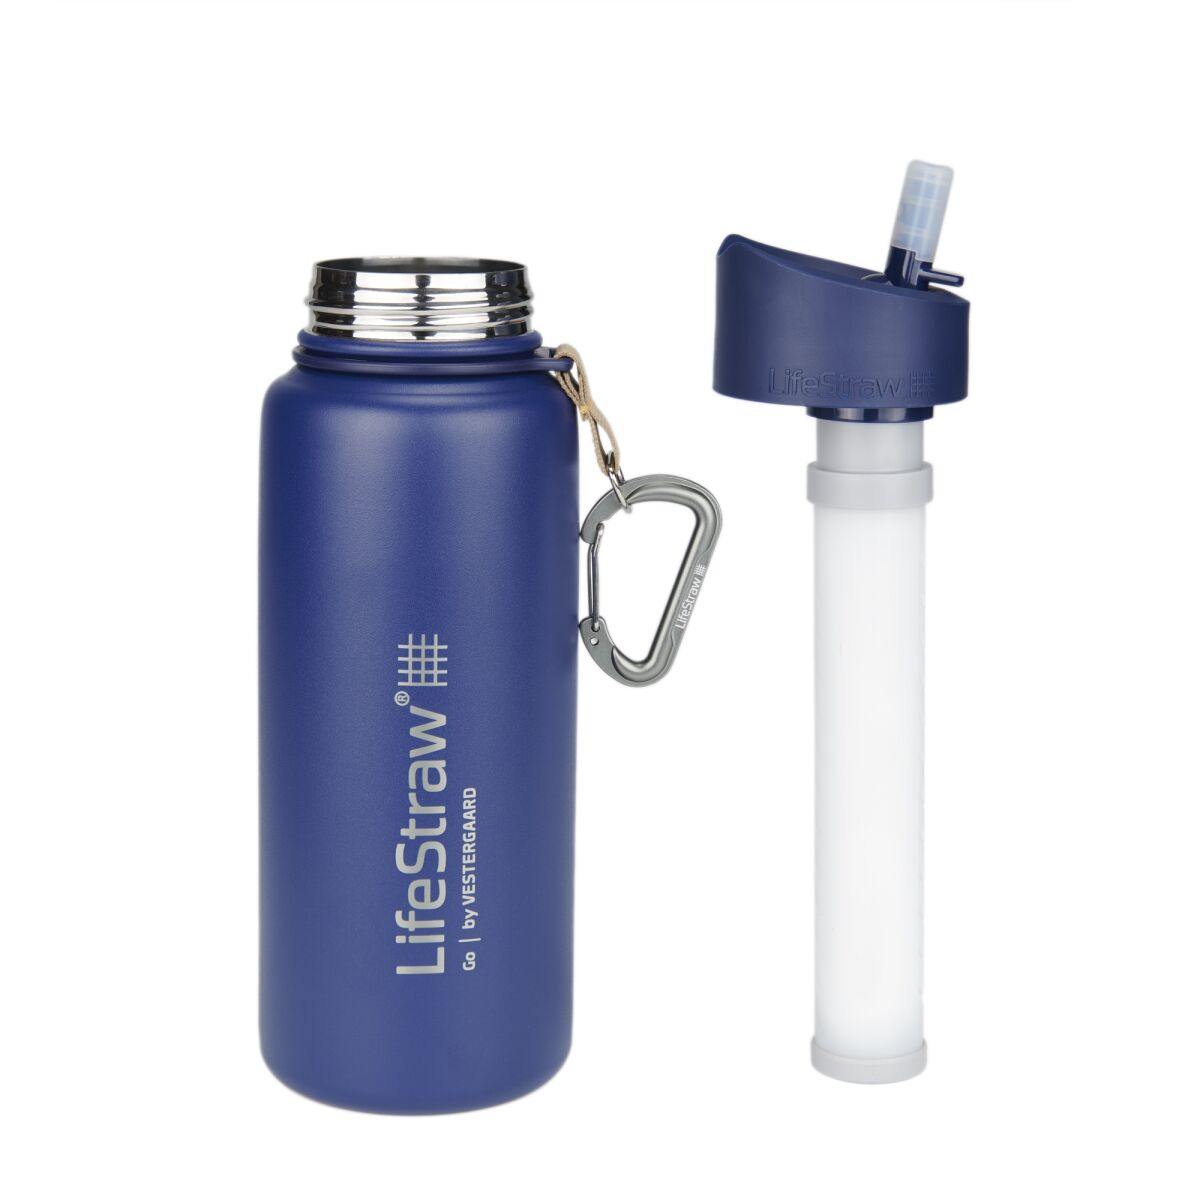 LifeStraw newer models feature a stainless steel water bottle outfitted with a filter. 